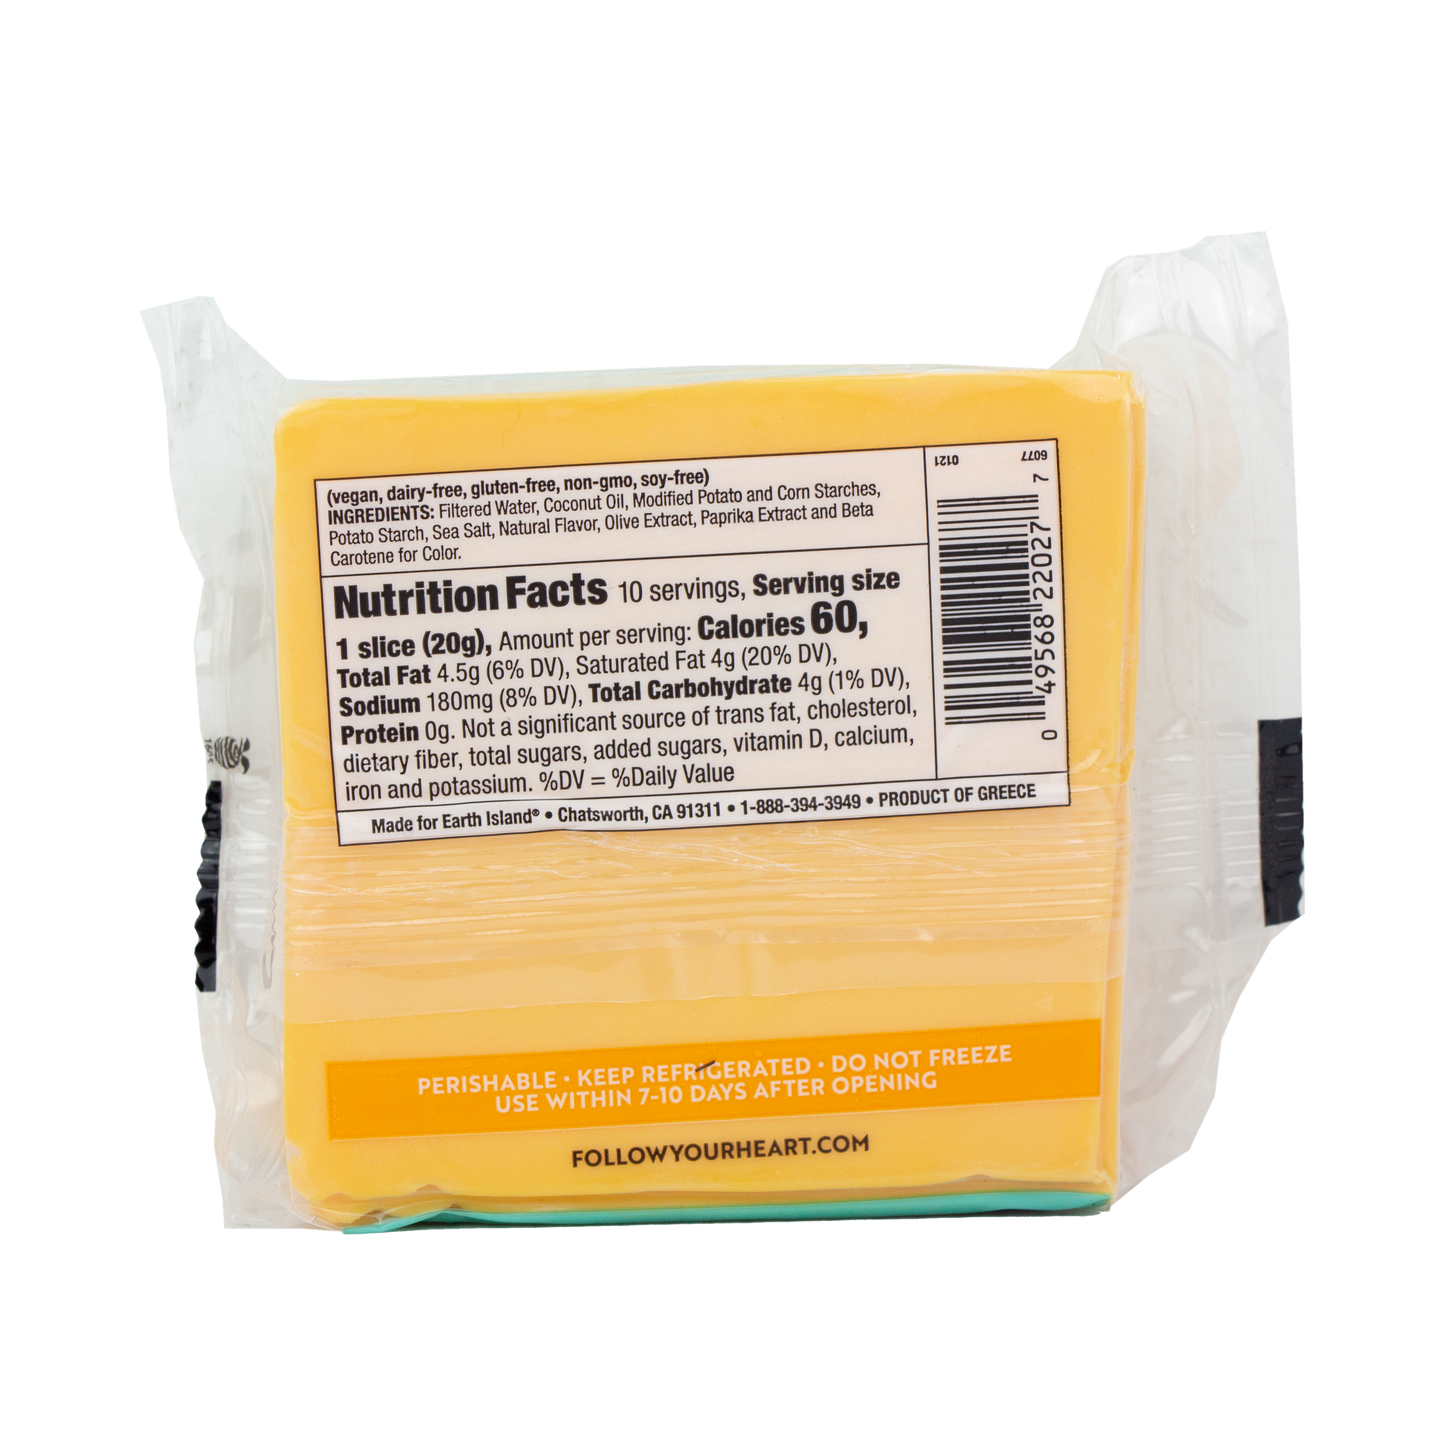 Follow Your Heart - Vegan Cheese American Slices (Pick-Up Store Only)